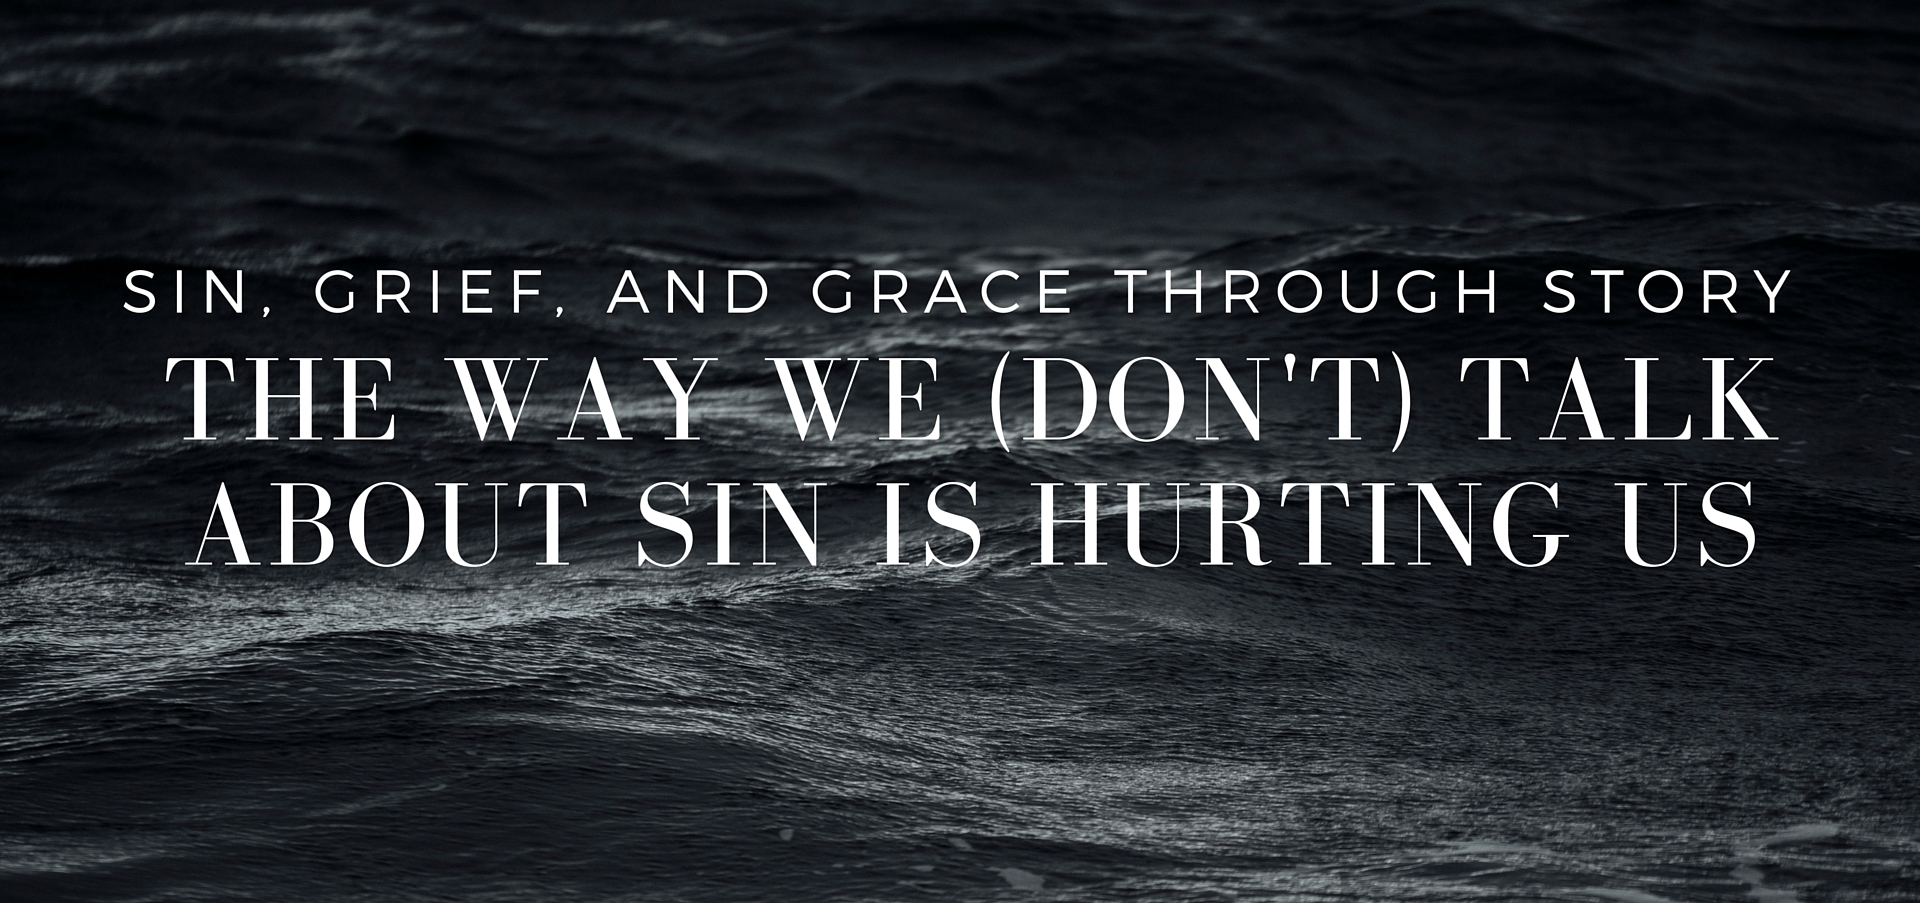 The ways we talk about sin (and the ways we avoid talking about sin) are hurting ourselves and each other - read more on KateRaeDavis.com